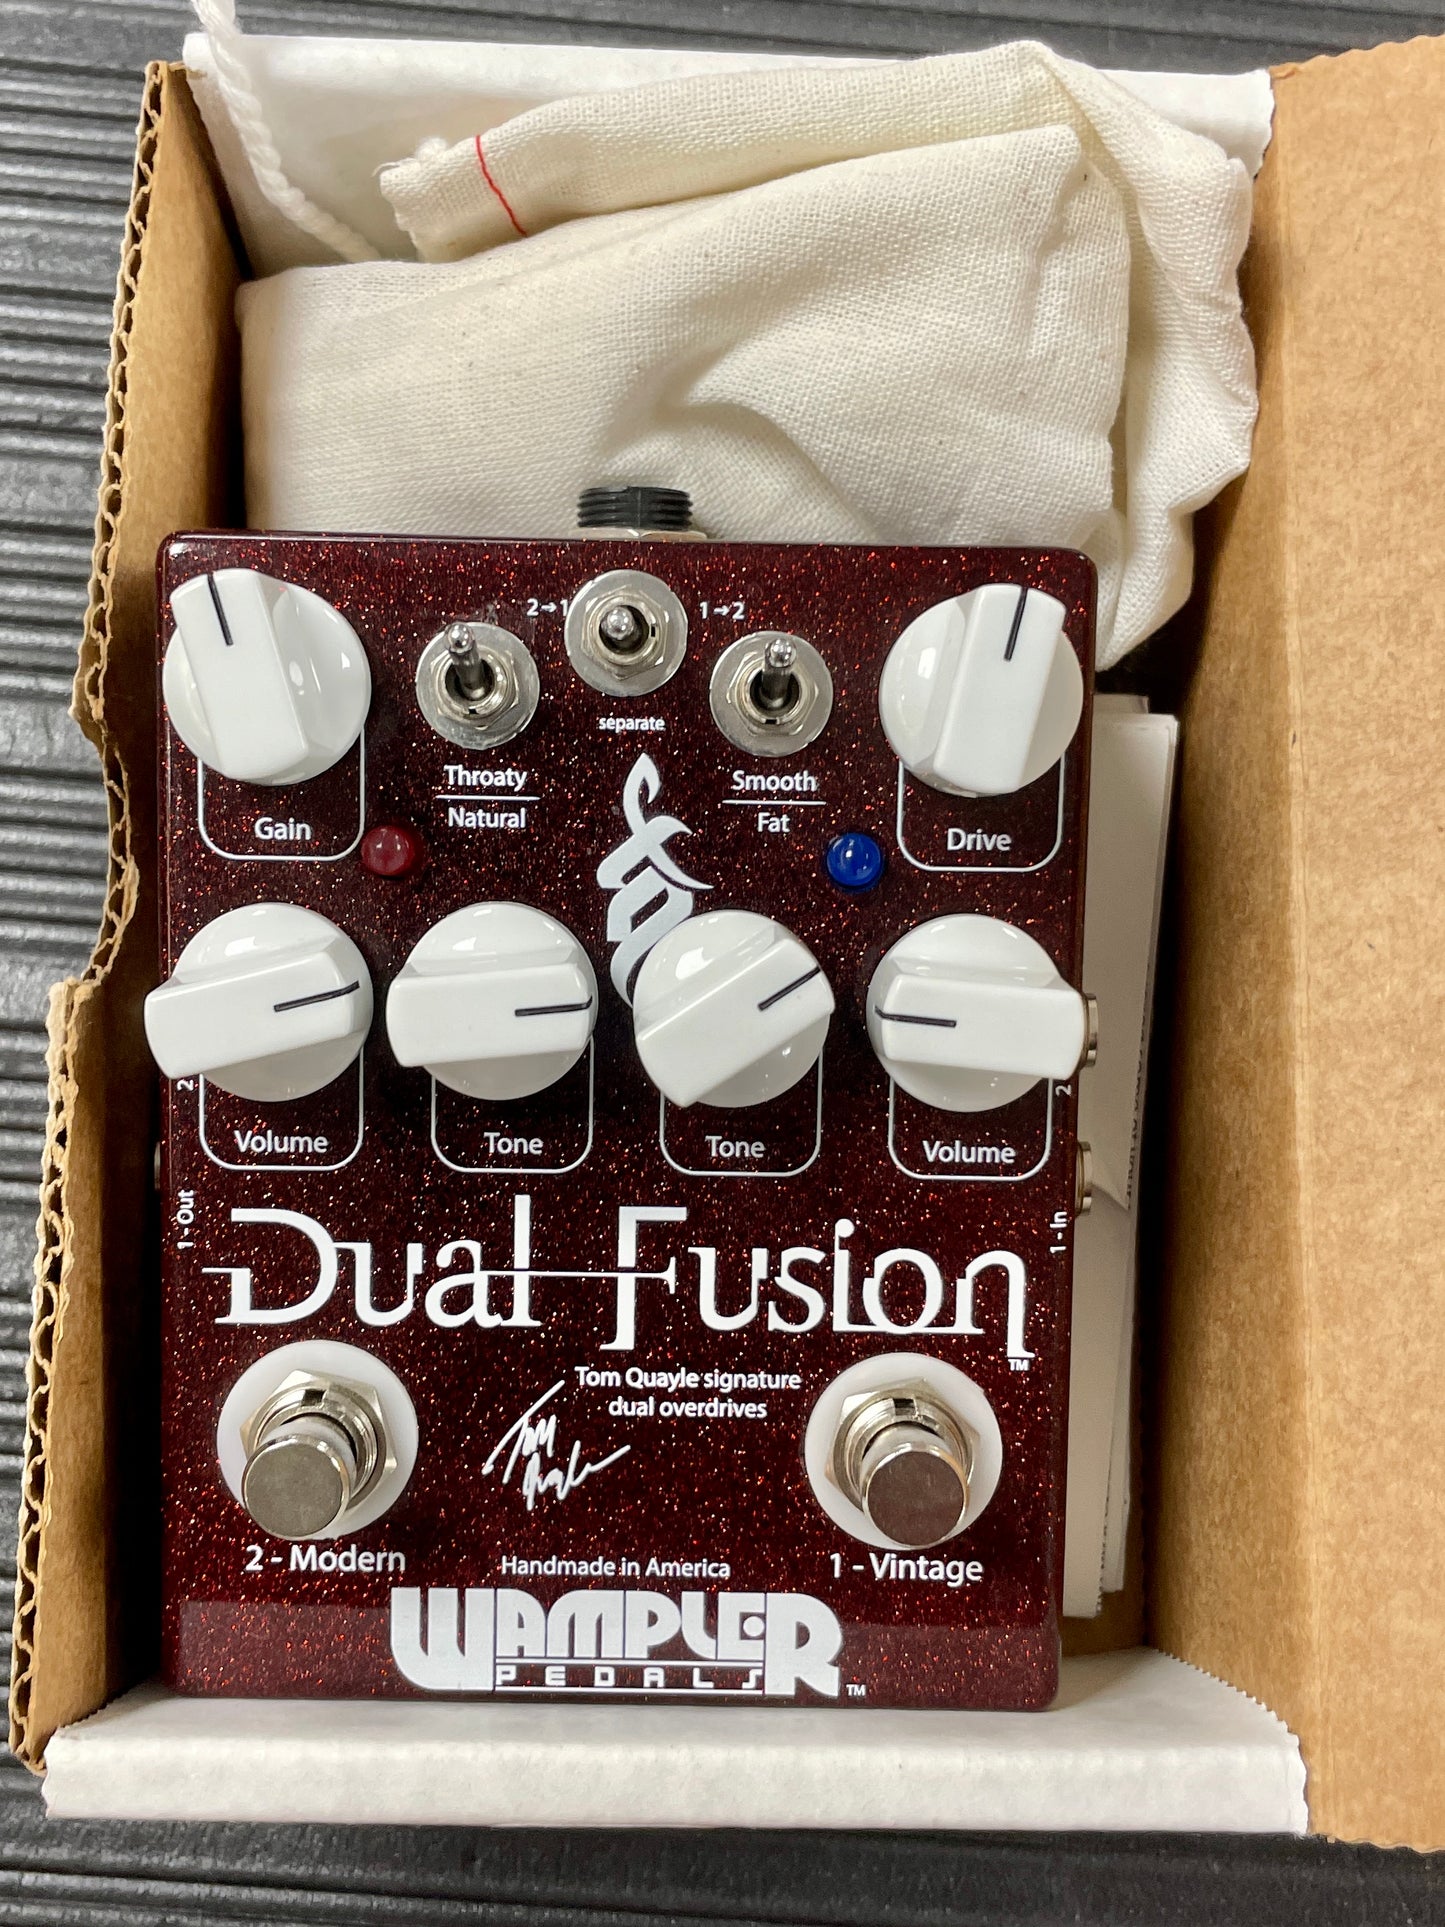 Used Wampler Dual Fusion Tom Quayle Overdrive Pedal TSS2895 in box.